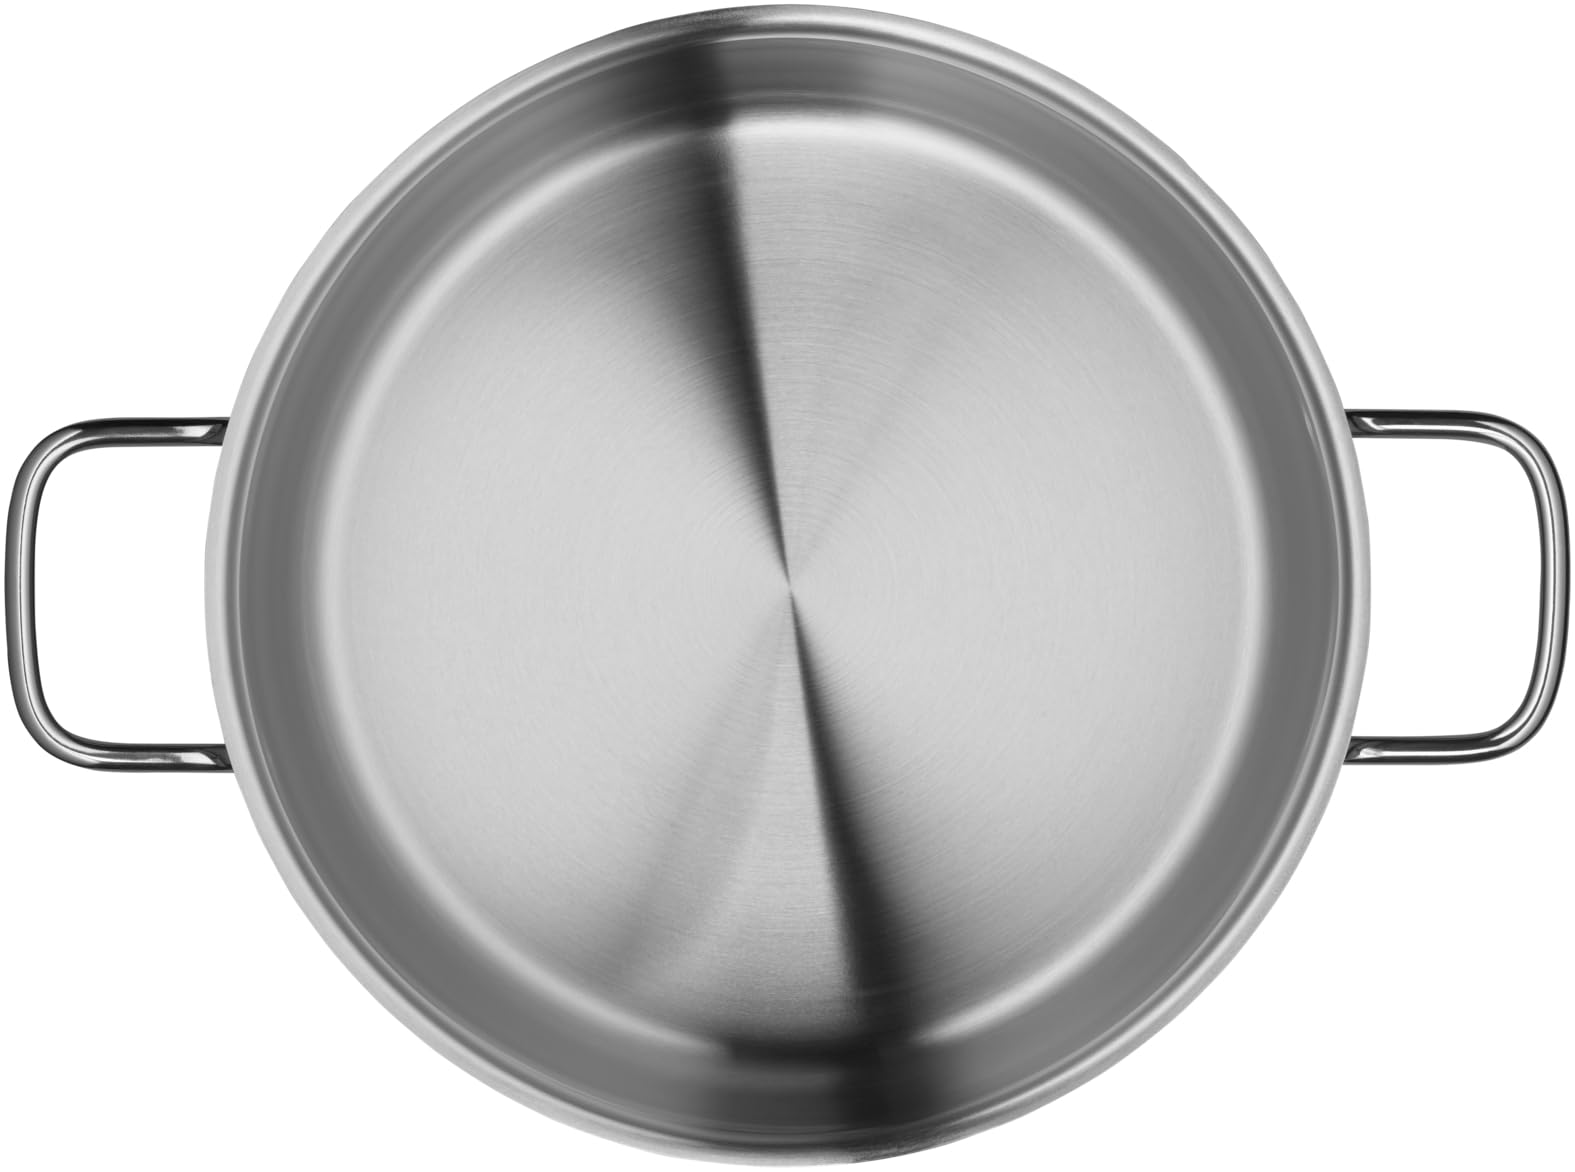 WMF Cookware Ø 24 cm Approx. 6,5L Diadem Plus Pouring Rim Glass Lid Cromargan® Stainless Steel Brushed Suitable for All Stove Tops Including Induction Dishwasher-Safe